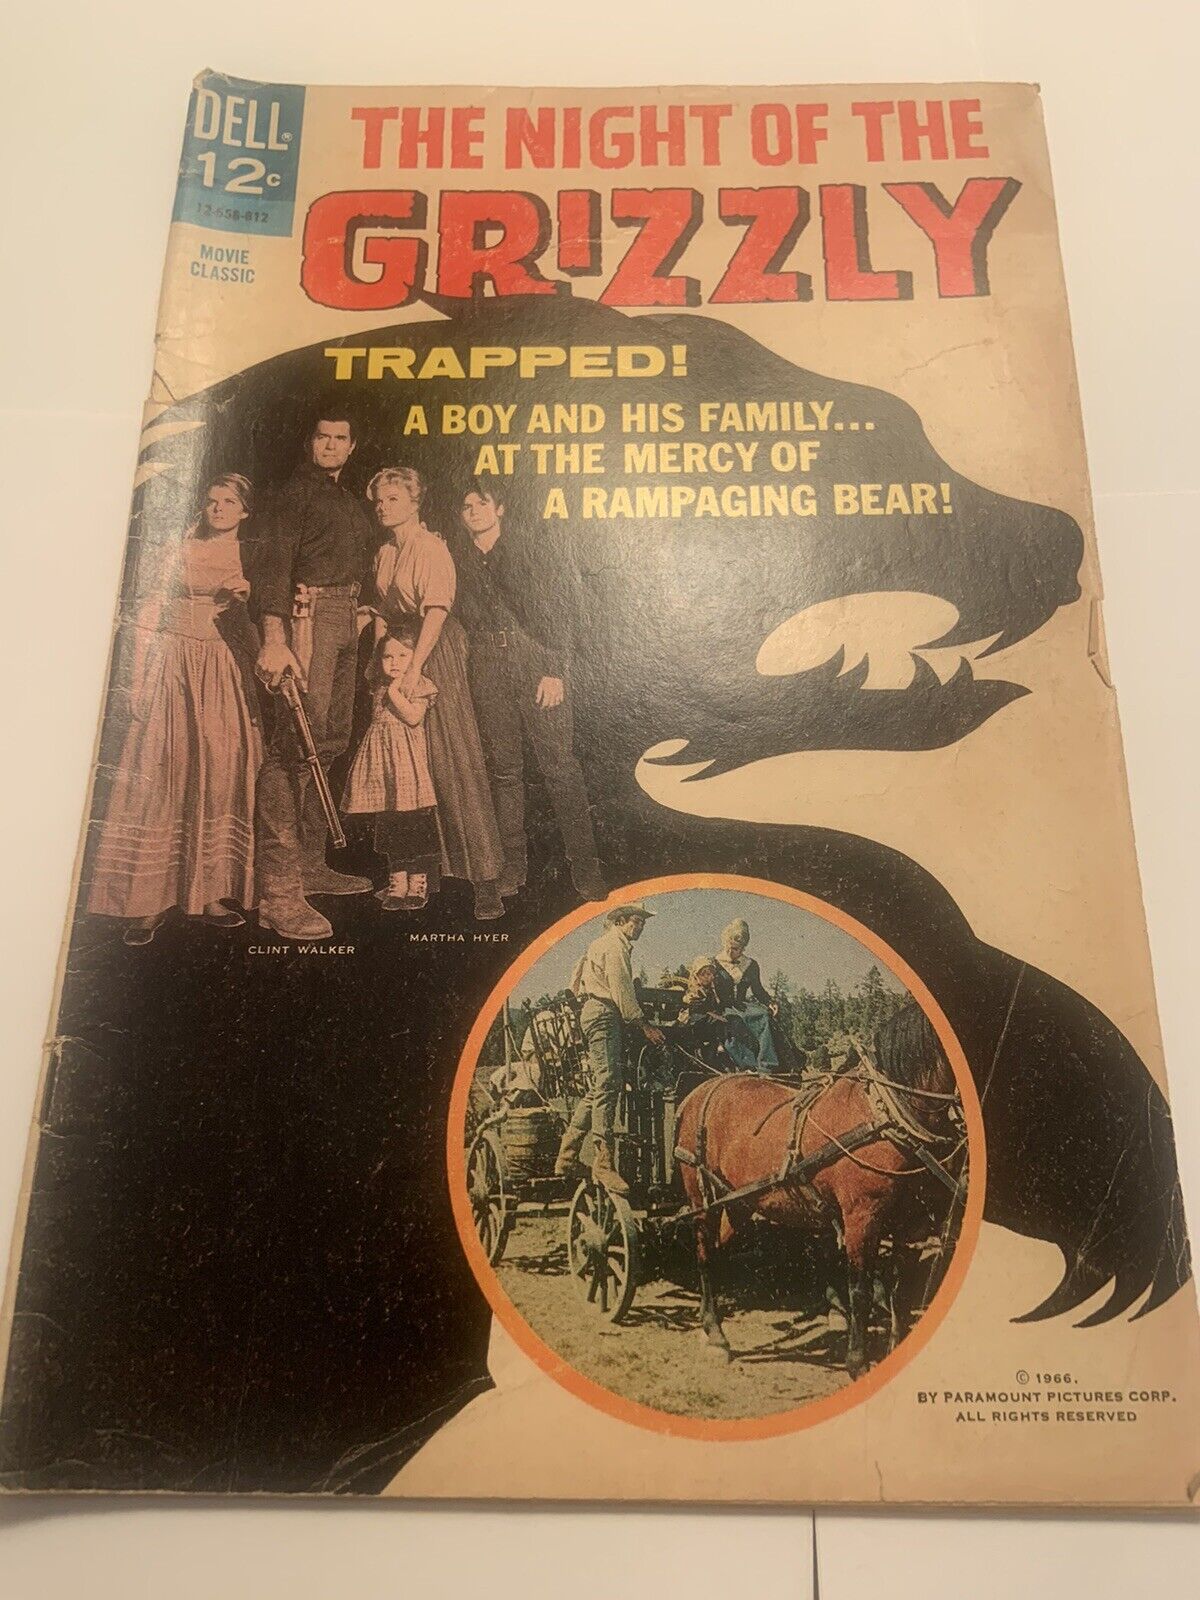 NIGHT OF THE GRIZZLY (1966) Dell Movie Classic #12-558-612